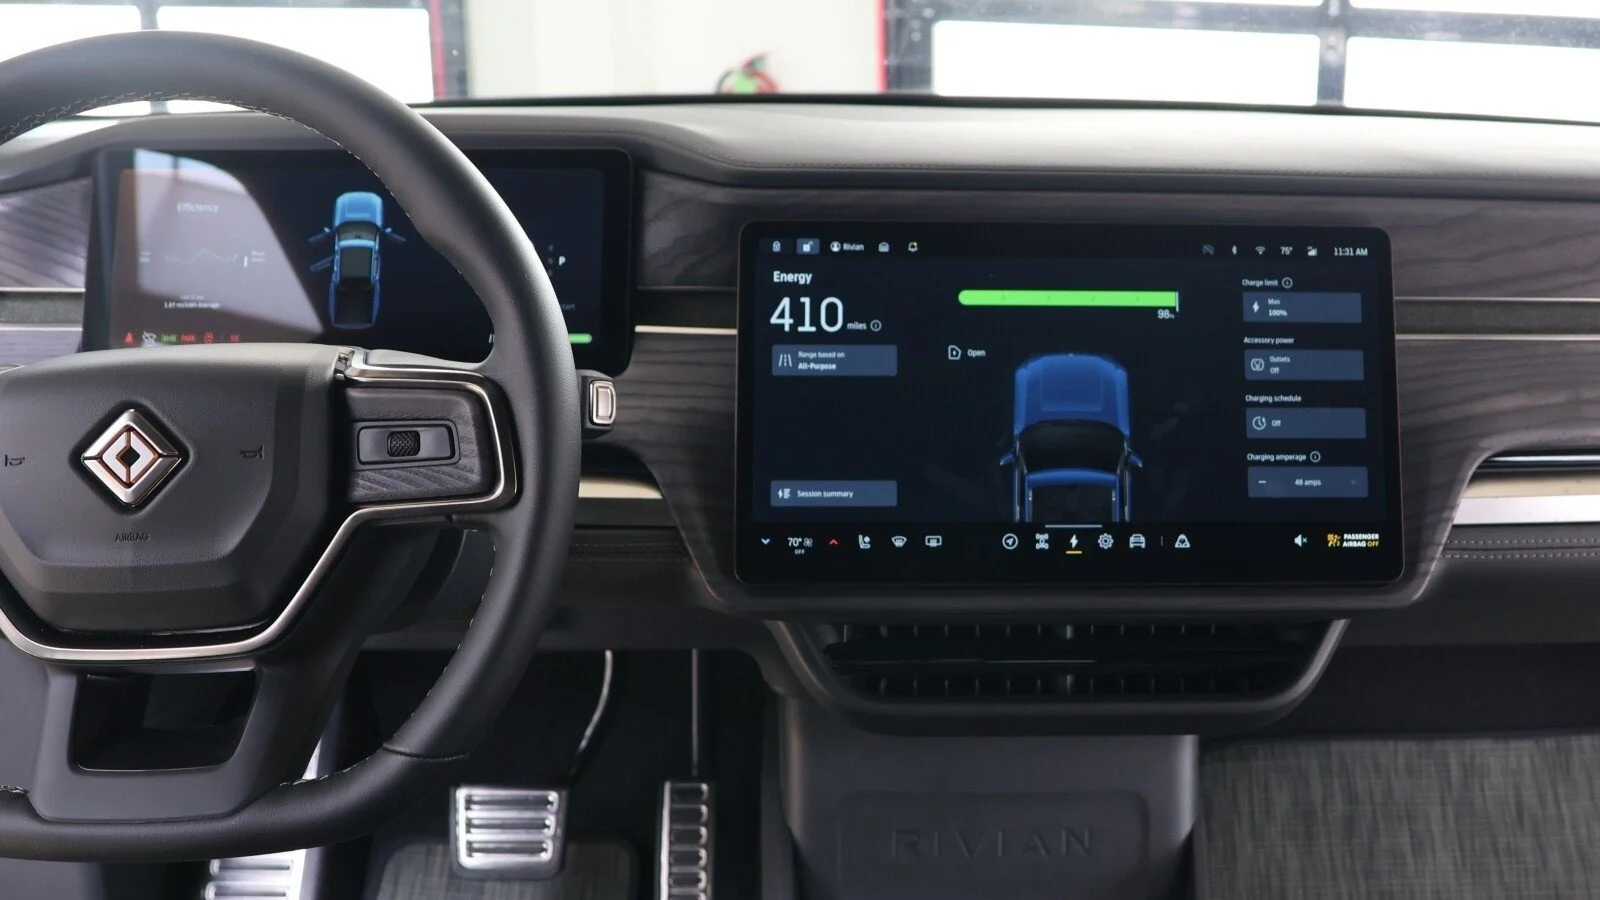 Rivian Uses Google's Android Automotive OS for Better In-Car Experience